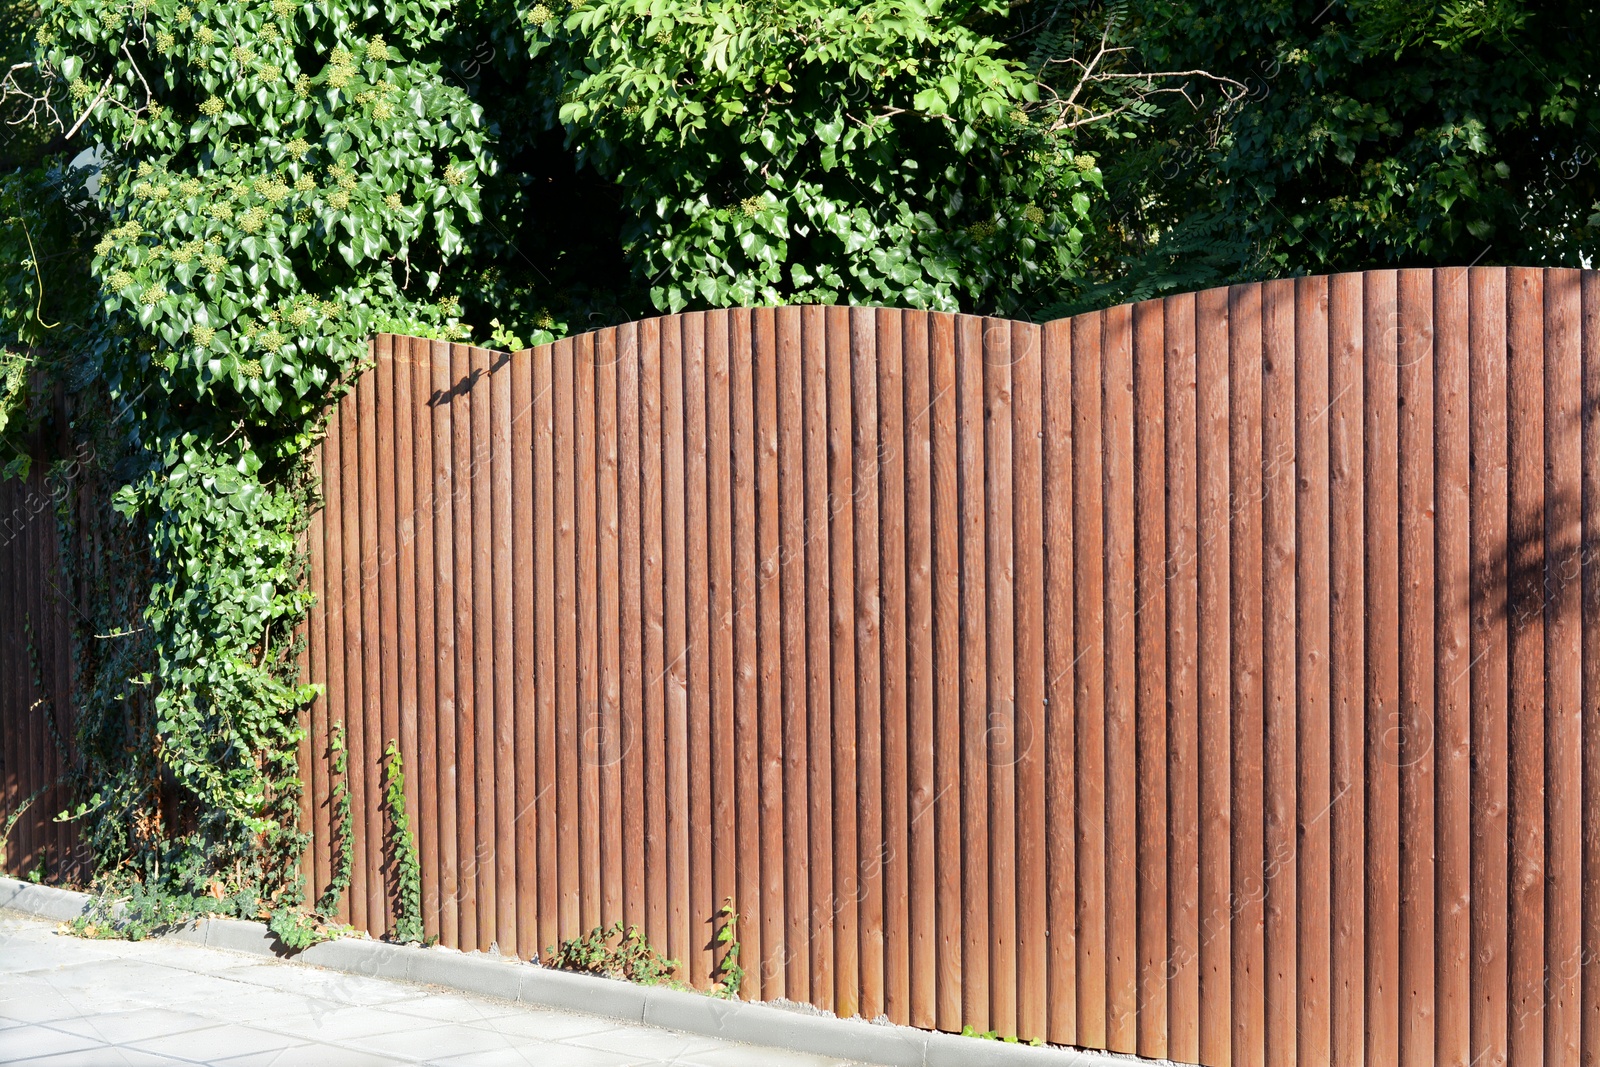 Photo of Wooden fence near trees on sunny day outdoors